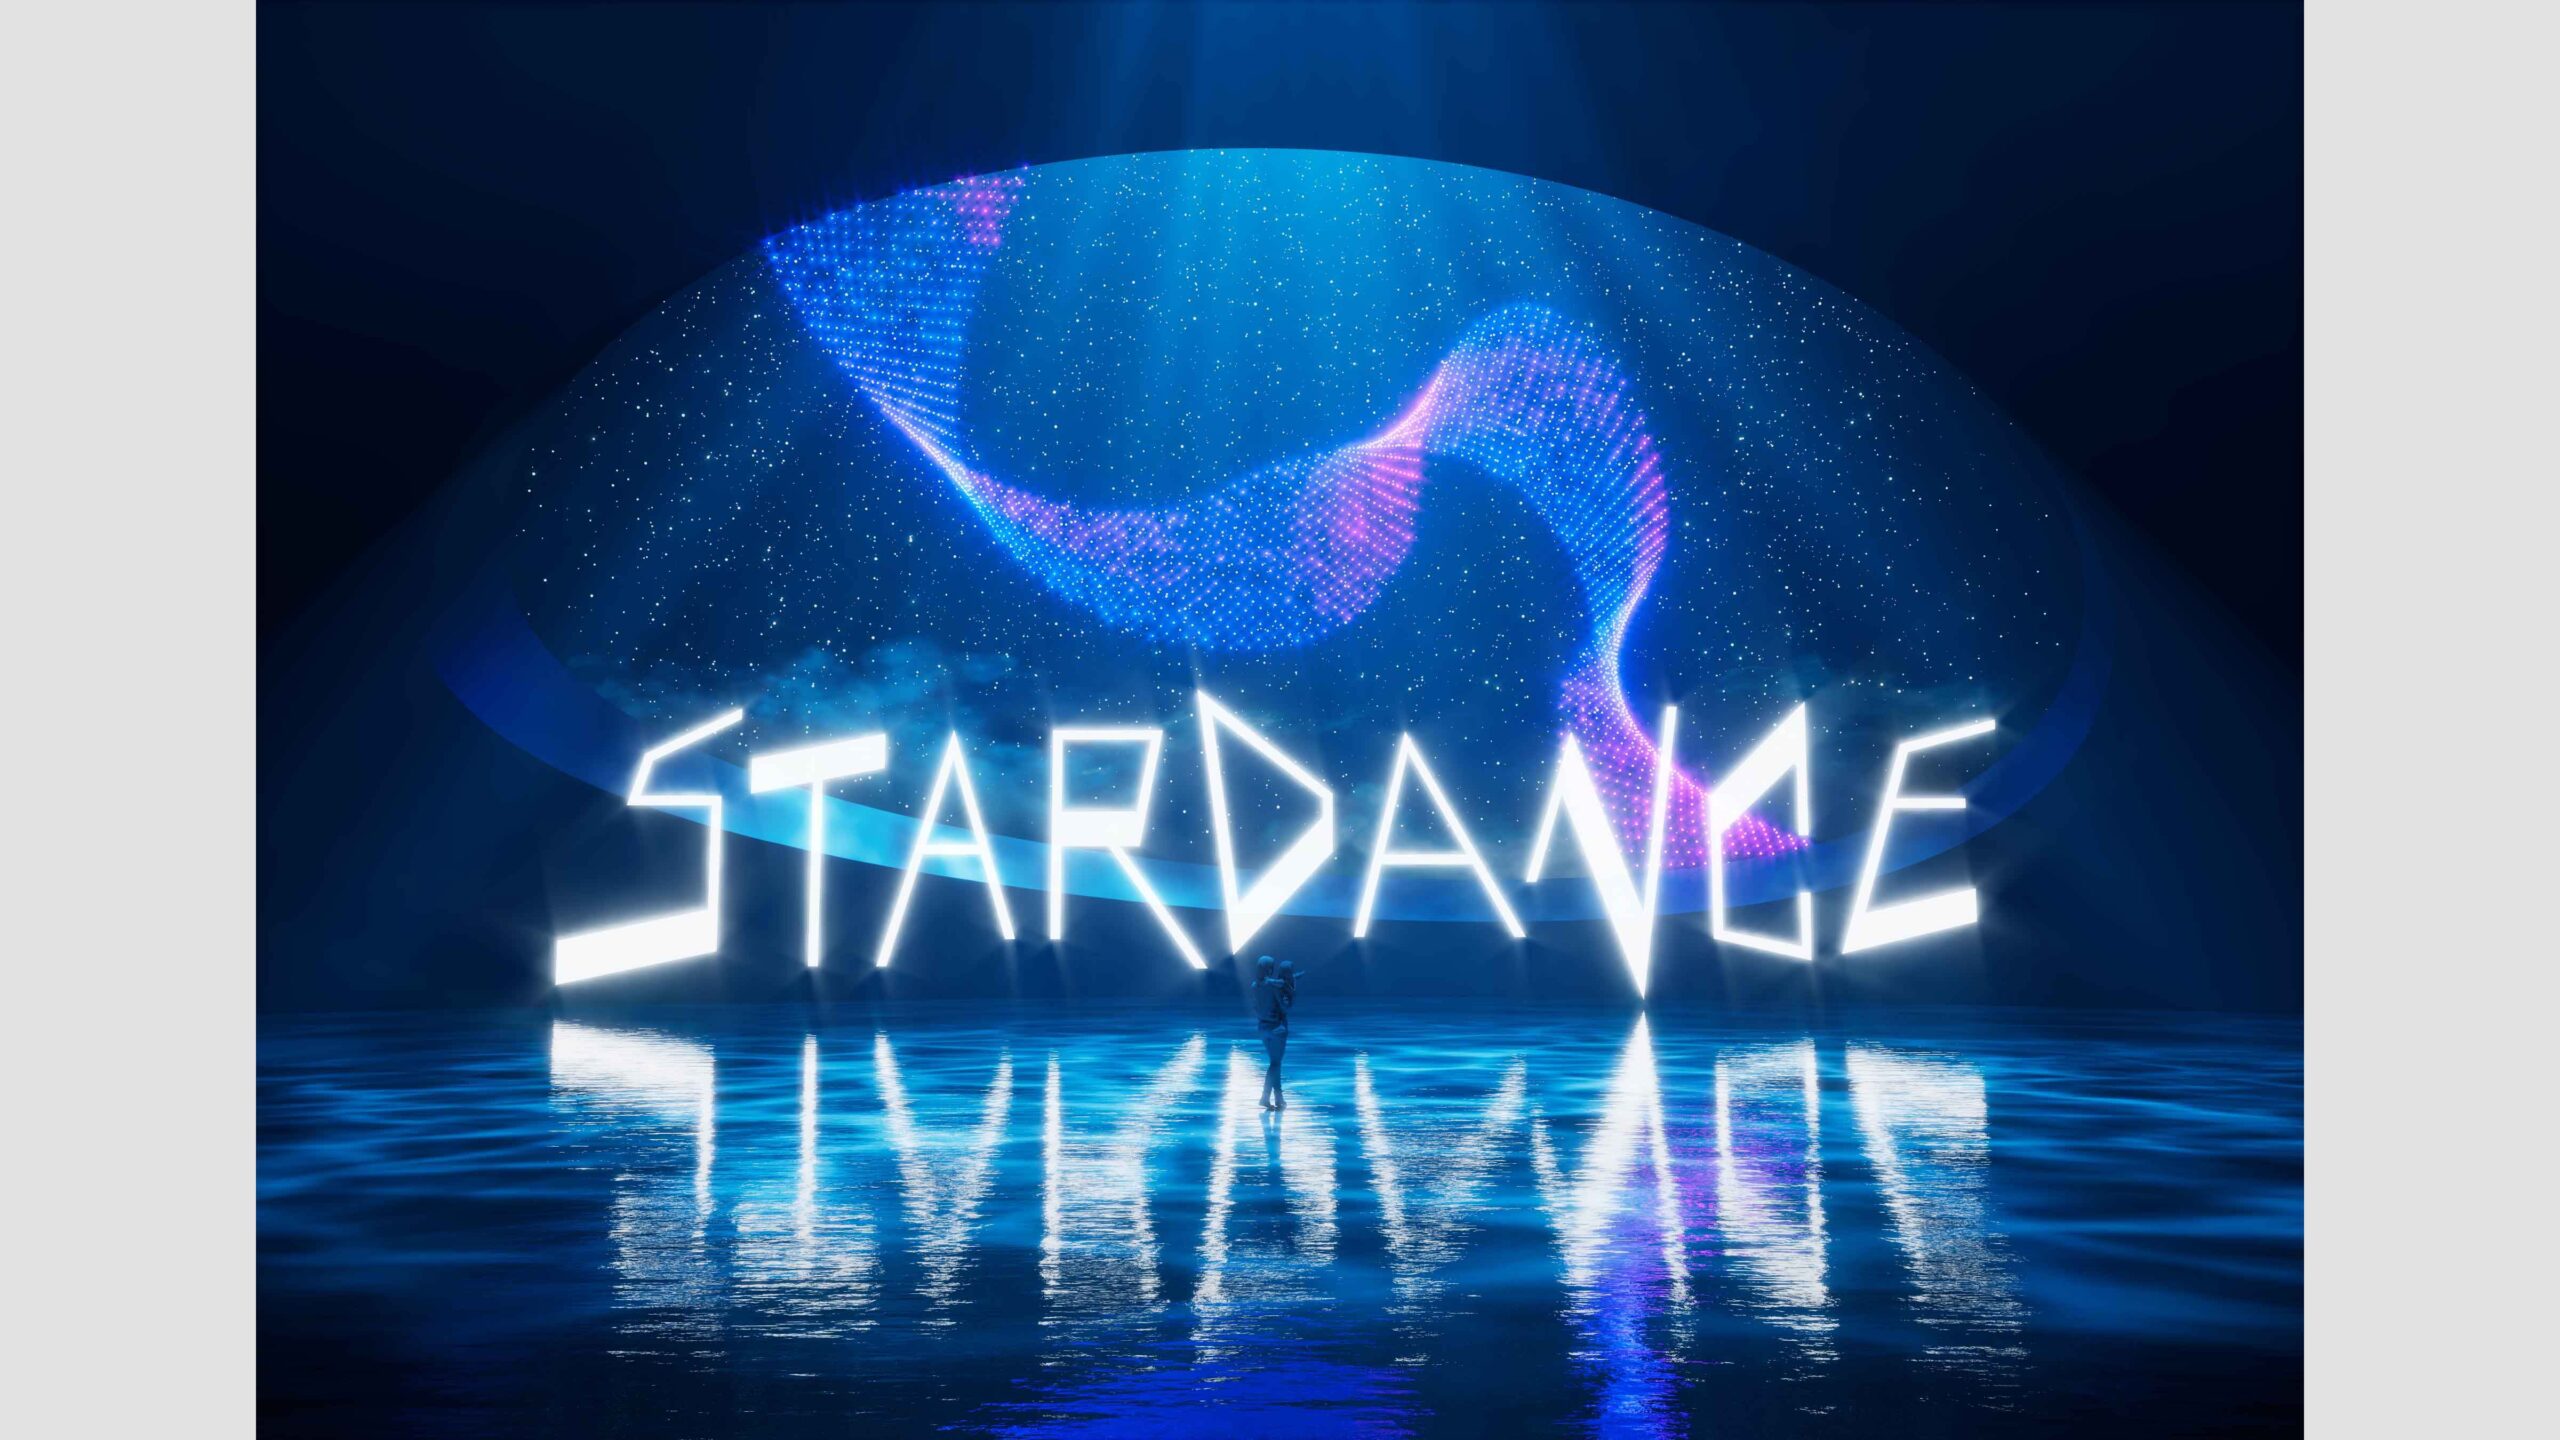 “STARDANCE in Yokohama Hakkeijima Sea Paradise”, a drone show festival of “Japan Anime & Characters”, will be held for five days from 23 (Sat) to 24 (Sun) and 29 (Fri) to 31 (Sun) December.